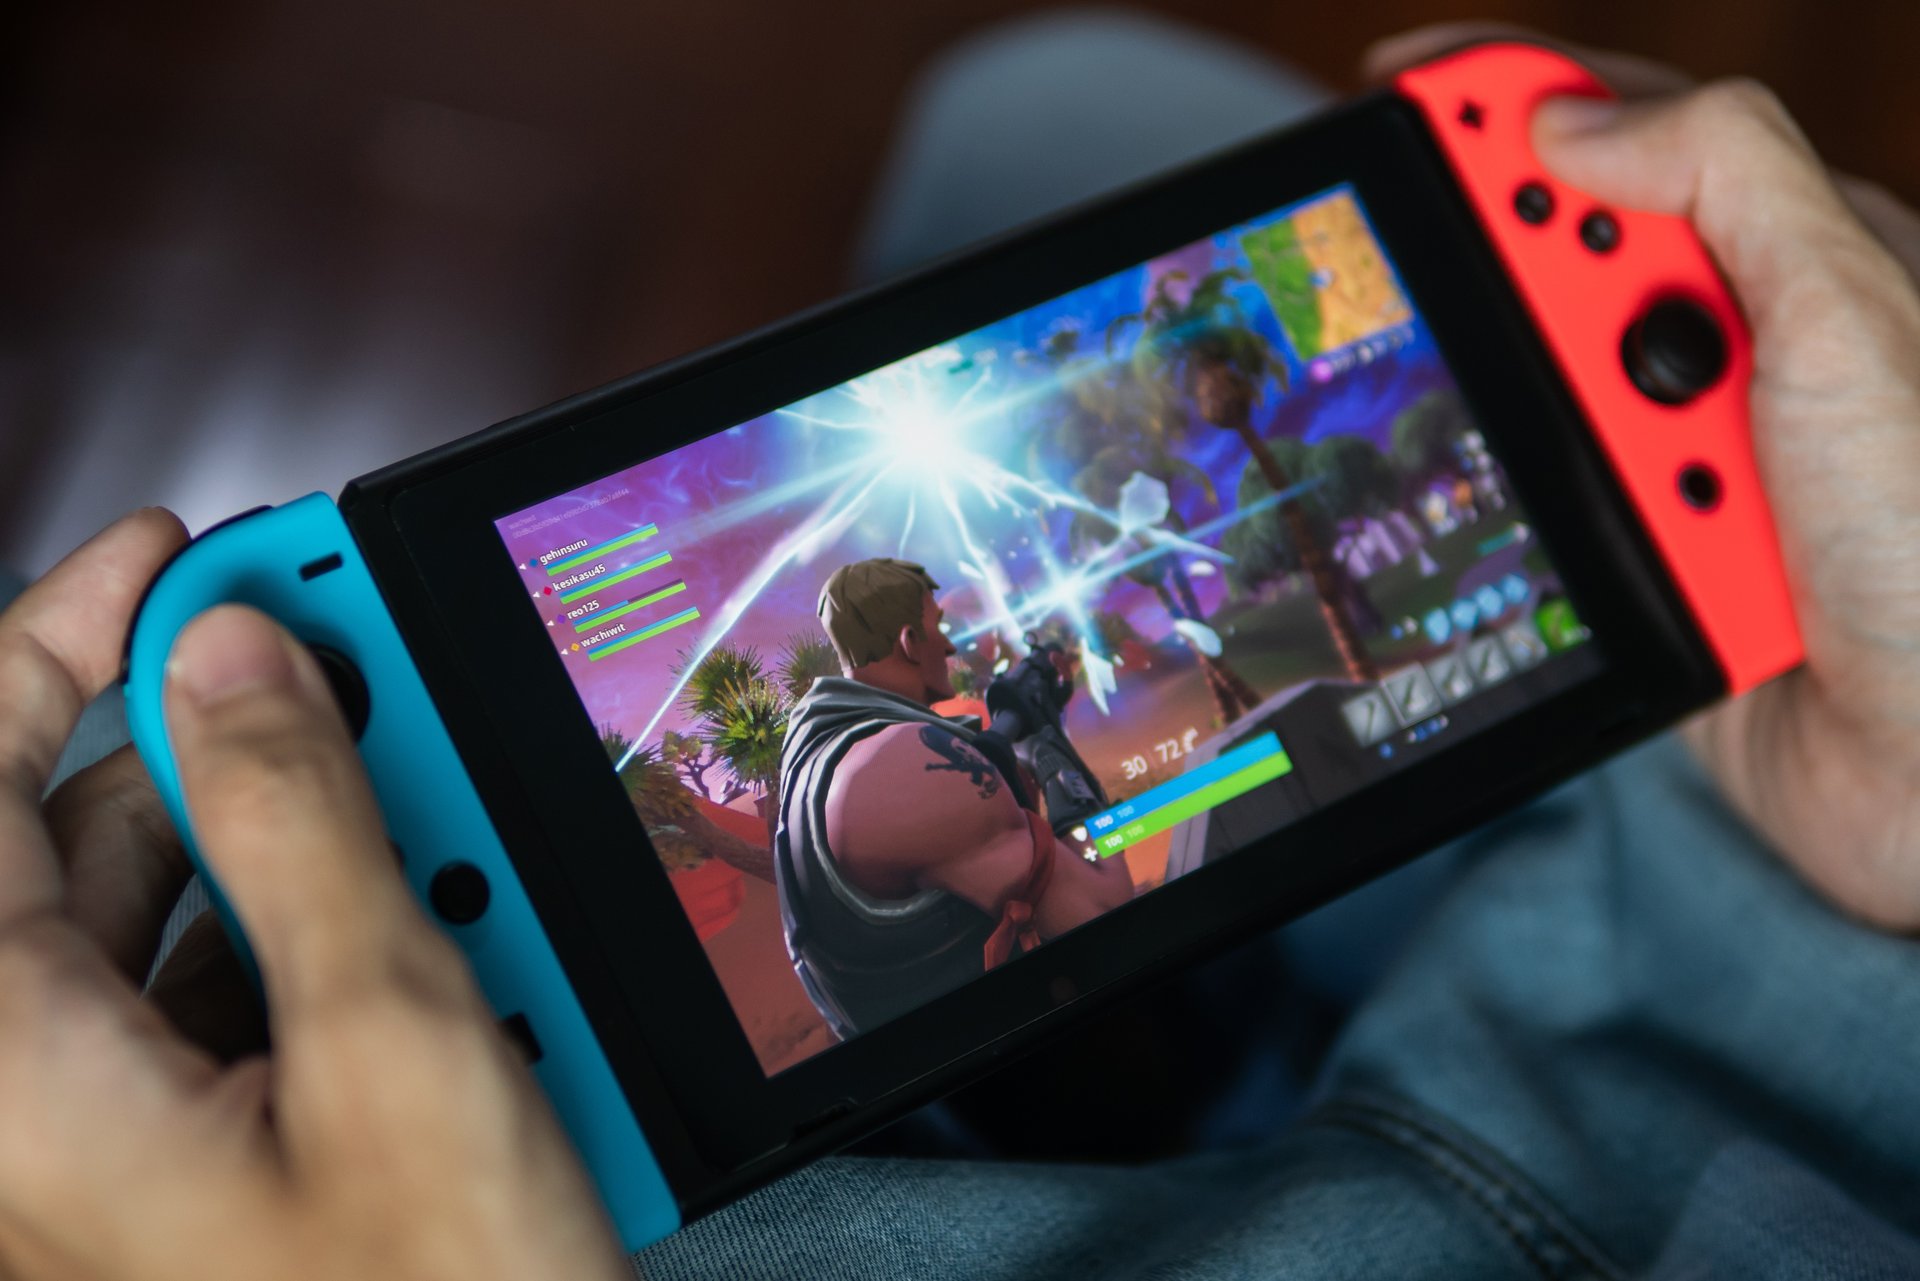 Close up of Fortnite being played on a Nintendo Switch.